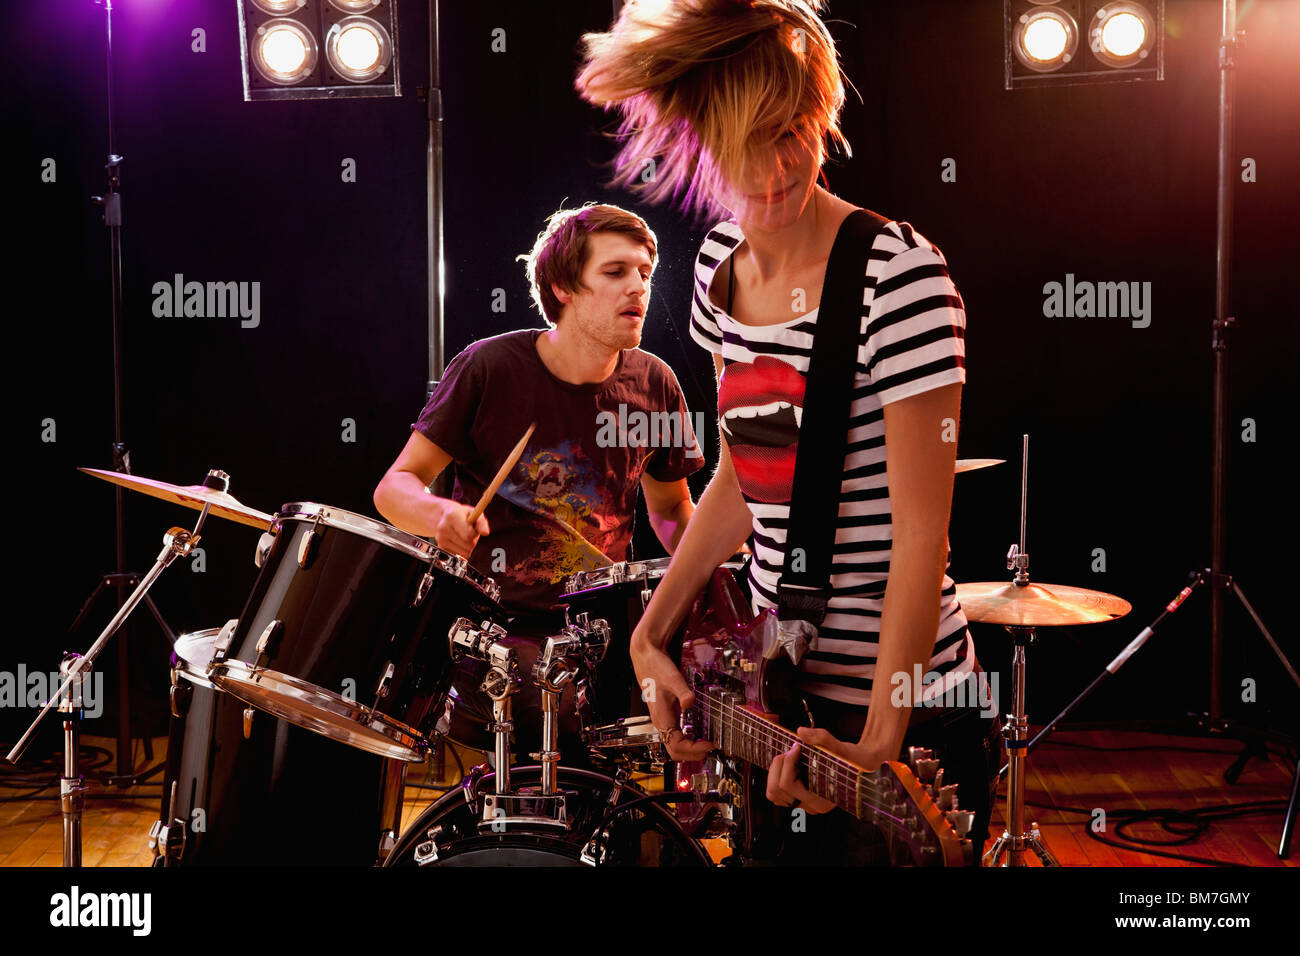 A man playing drums and a woman playing guitar in a rock band performing on stage Stock Photo